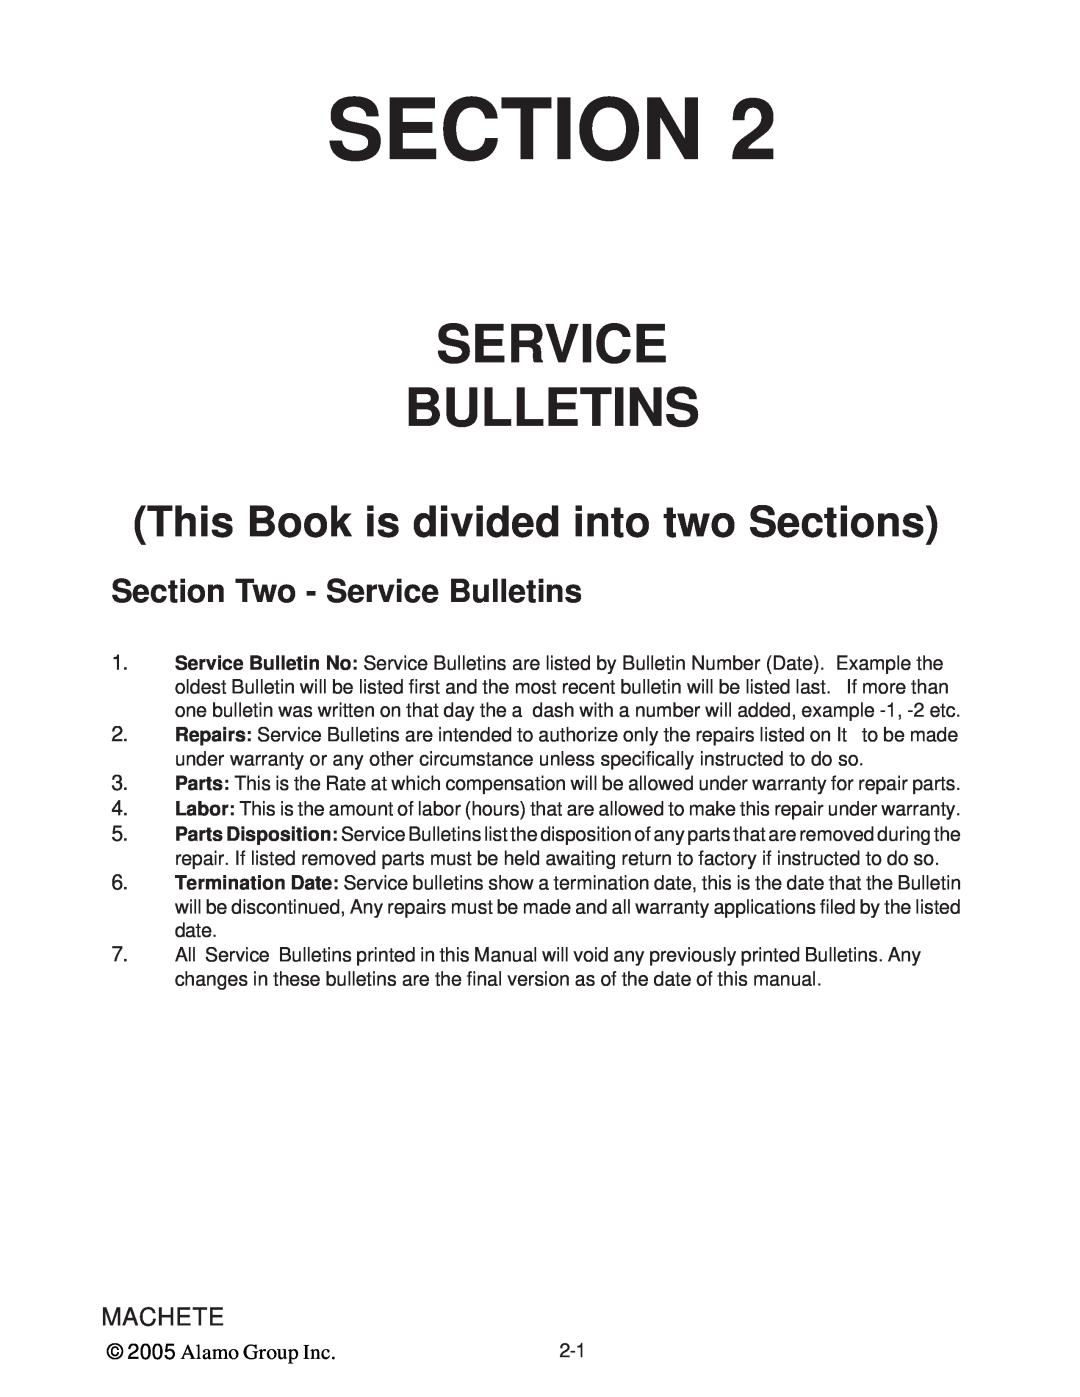 Alamo T 7740 This Book is divided into two Sections, Section Two - Service Bulletins, Machete, Alamo Group Inc 